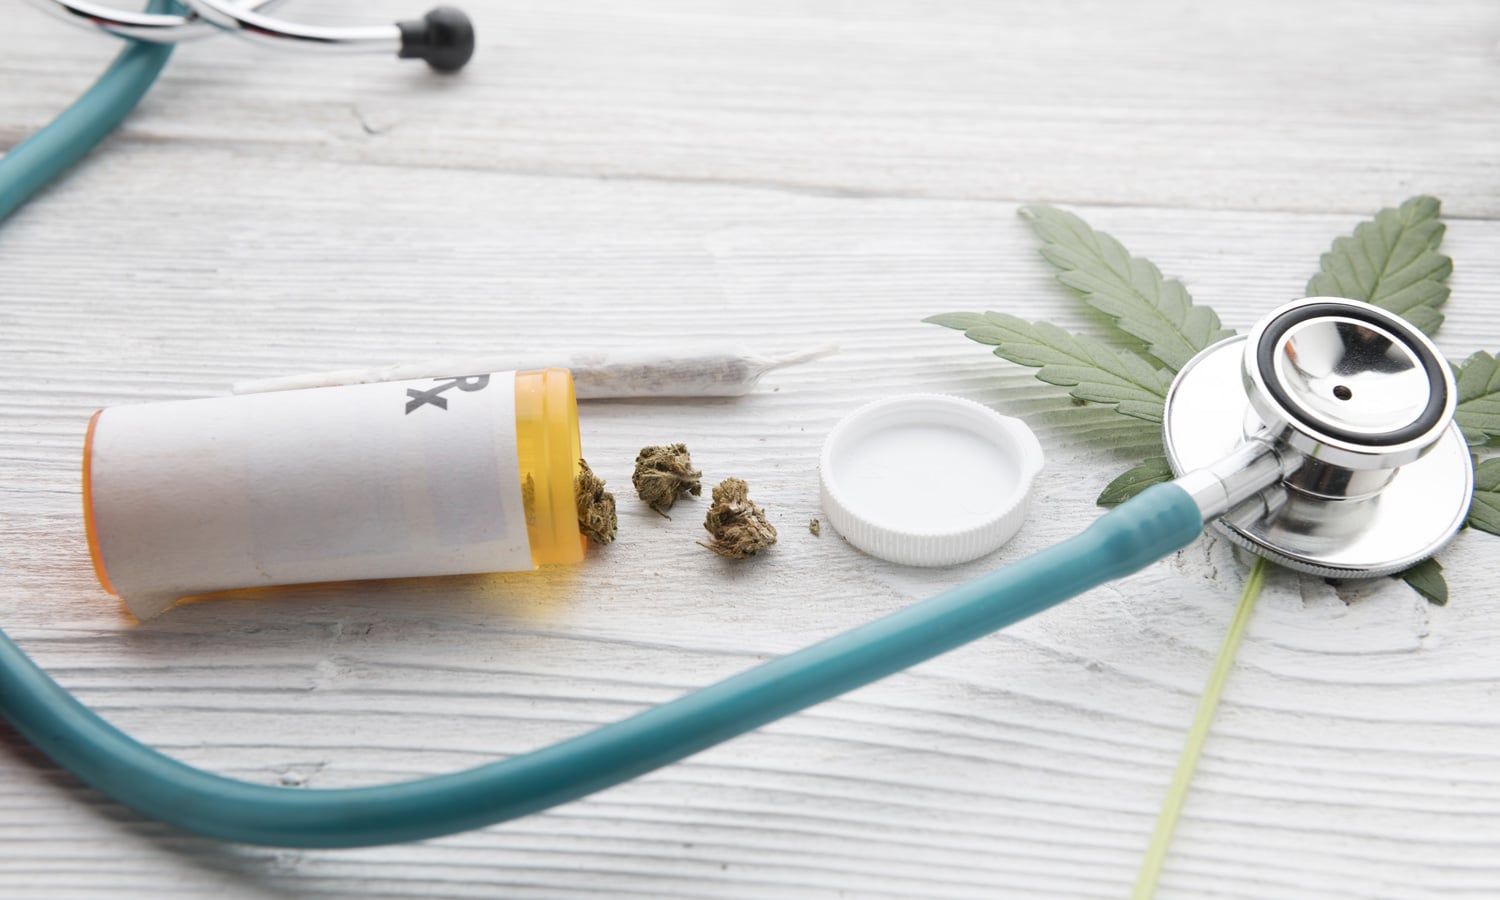 Is It Possible For Medical Marijuana To Go Bad?